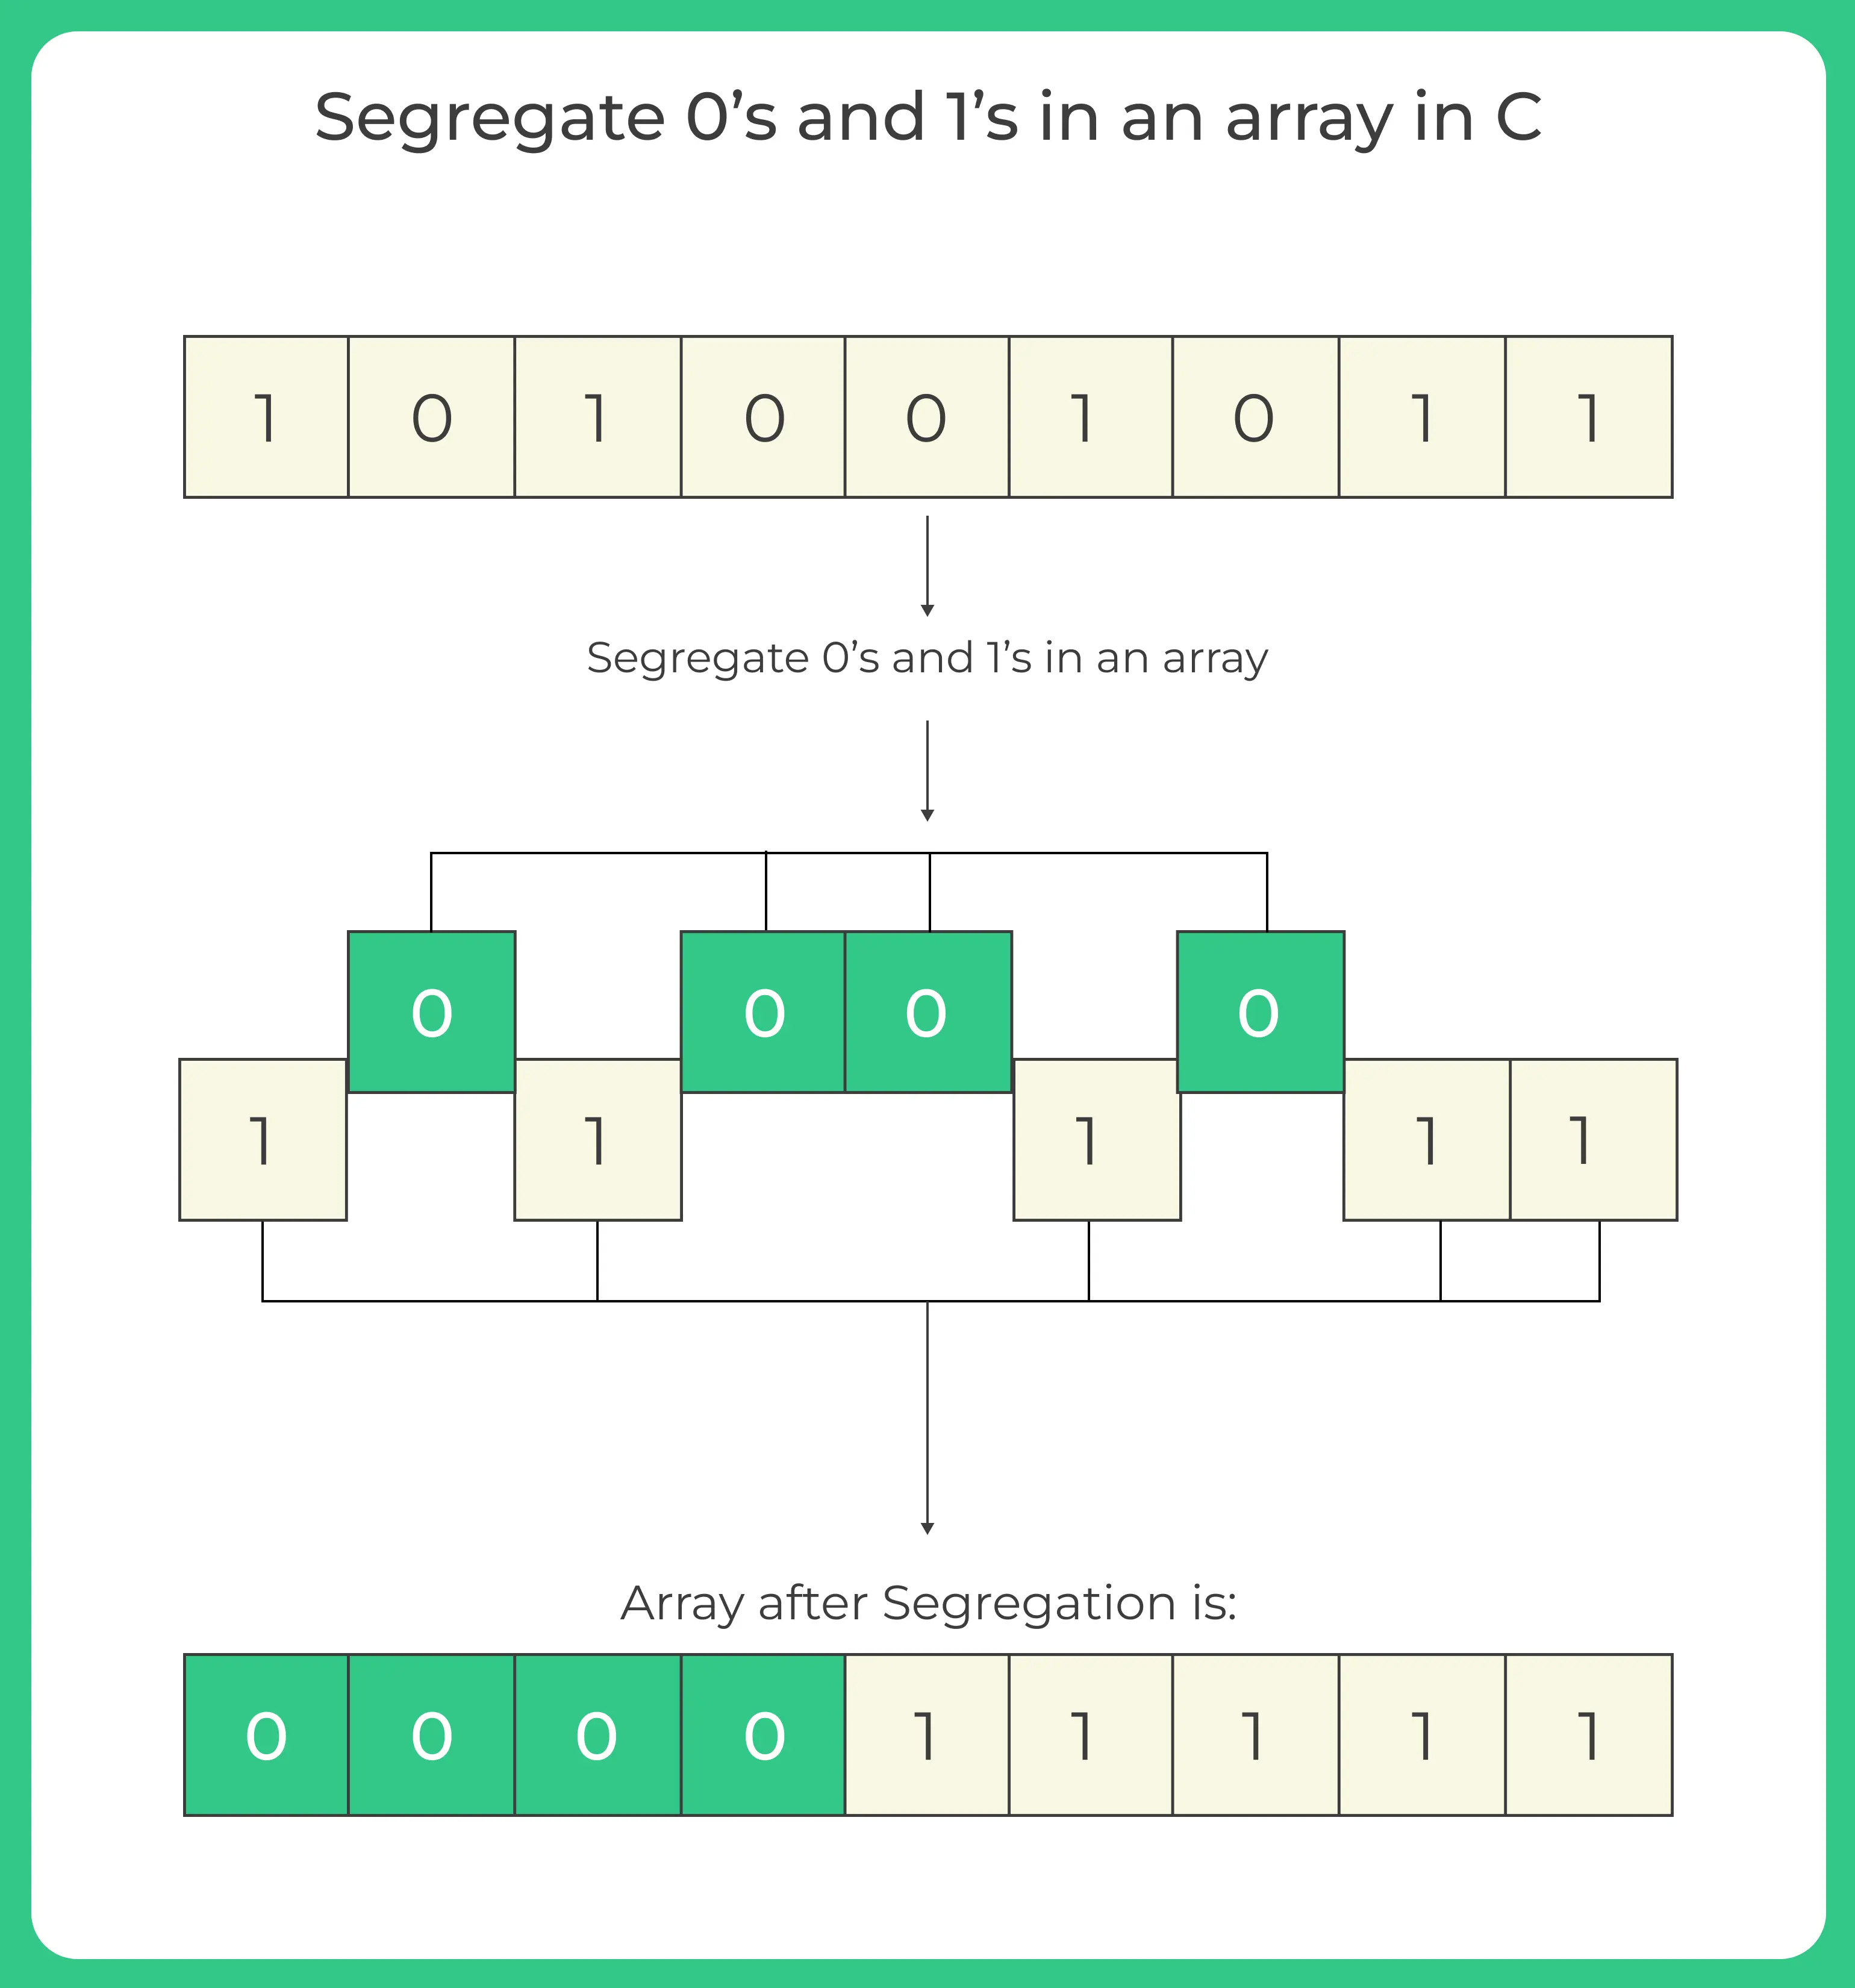 Segregate 0’s and 1’s in an array in C